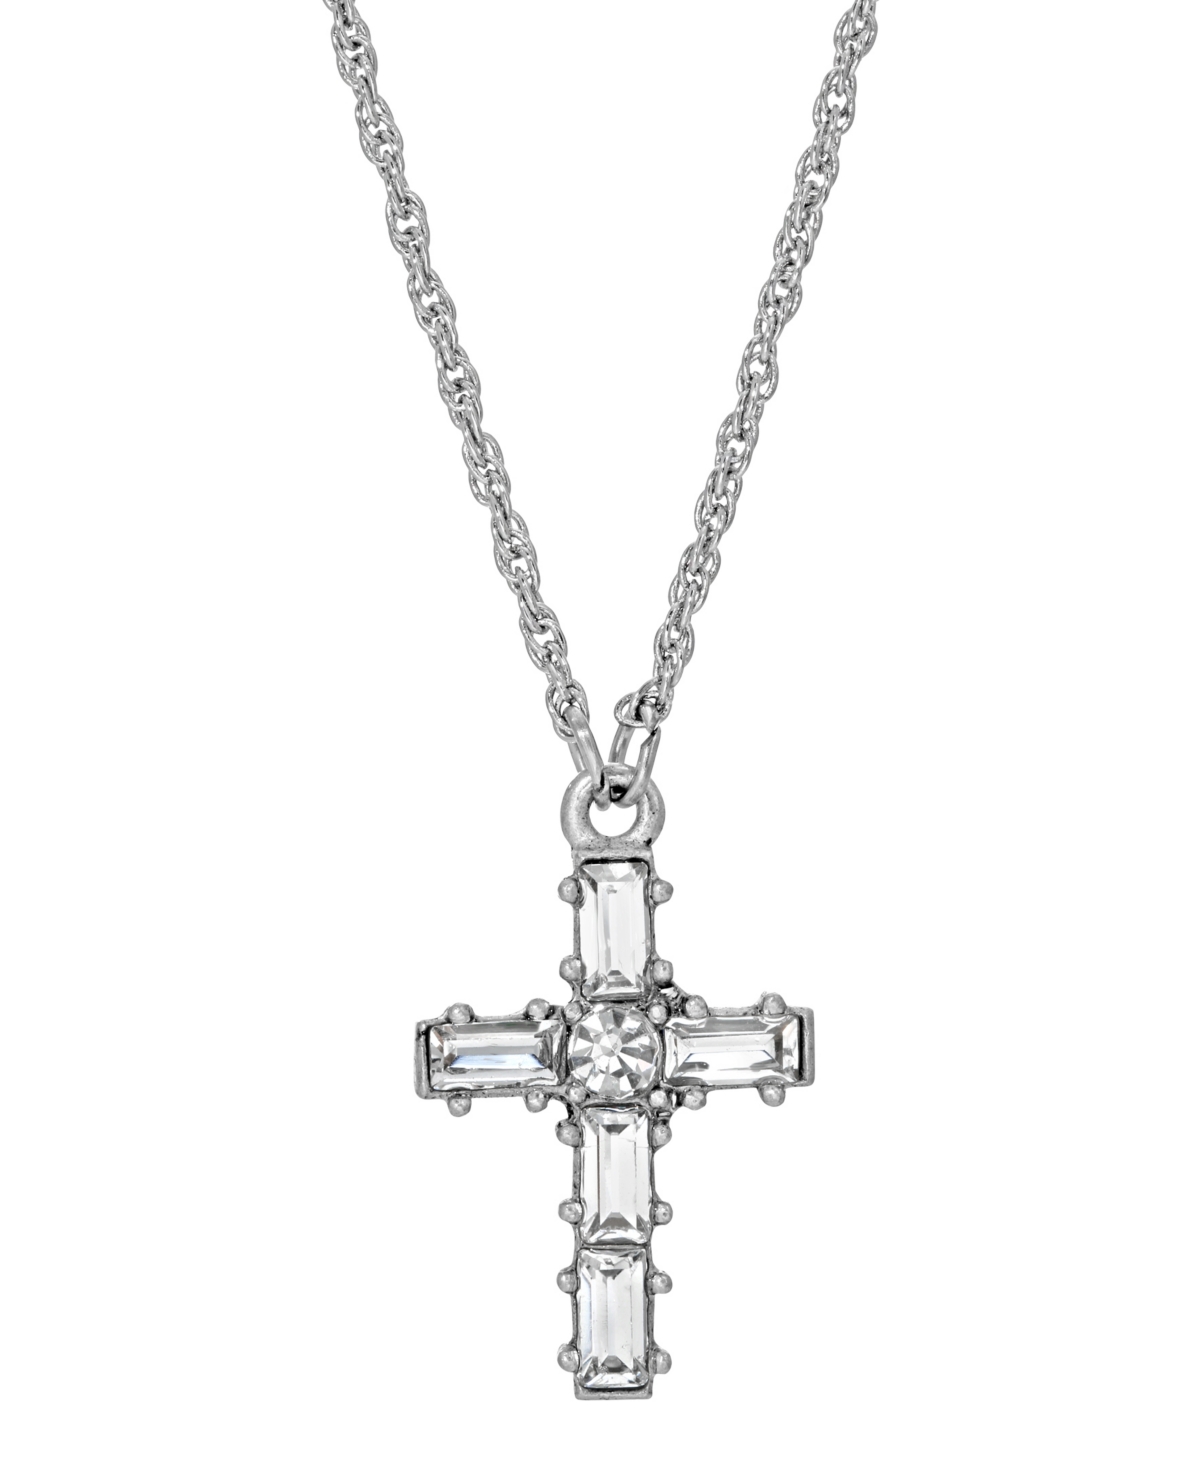 Pewter Crystal Small Cross Necklace - White